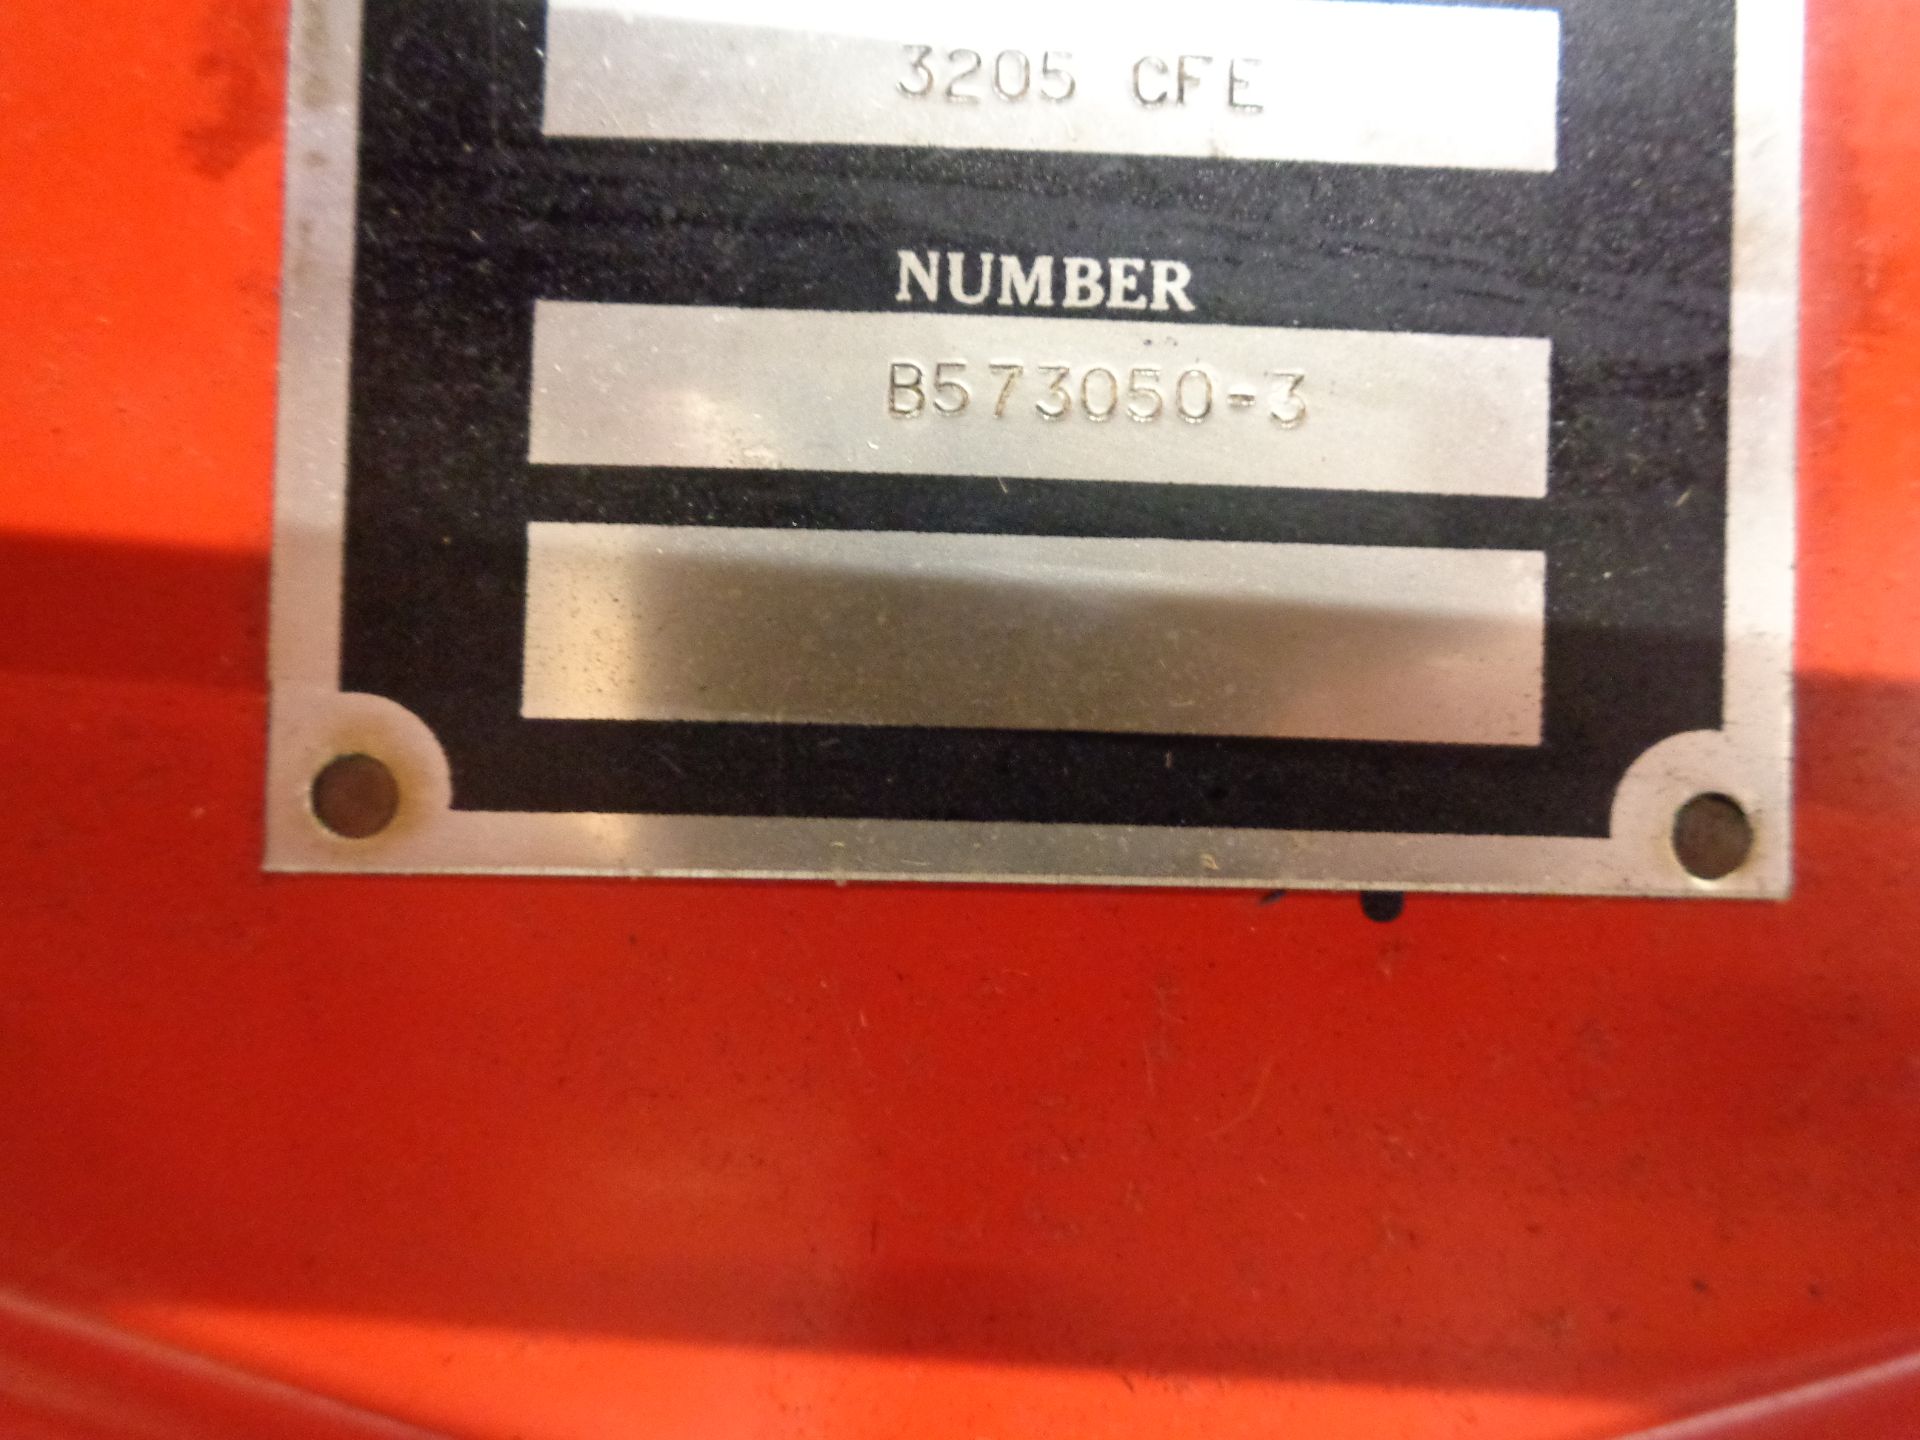 Avery 3205 CFE weigh scales, serial no. B573050-3 capacity 15CWT by 2LB divisions - Image 3 of 4